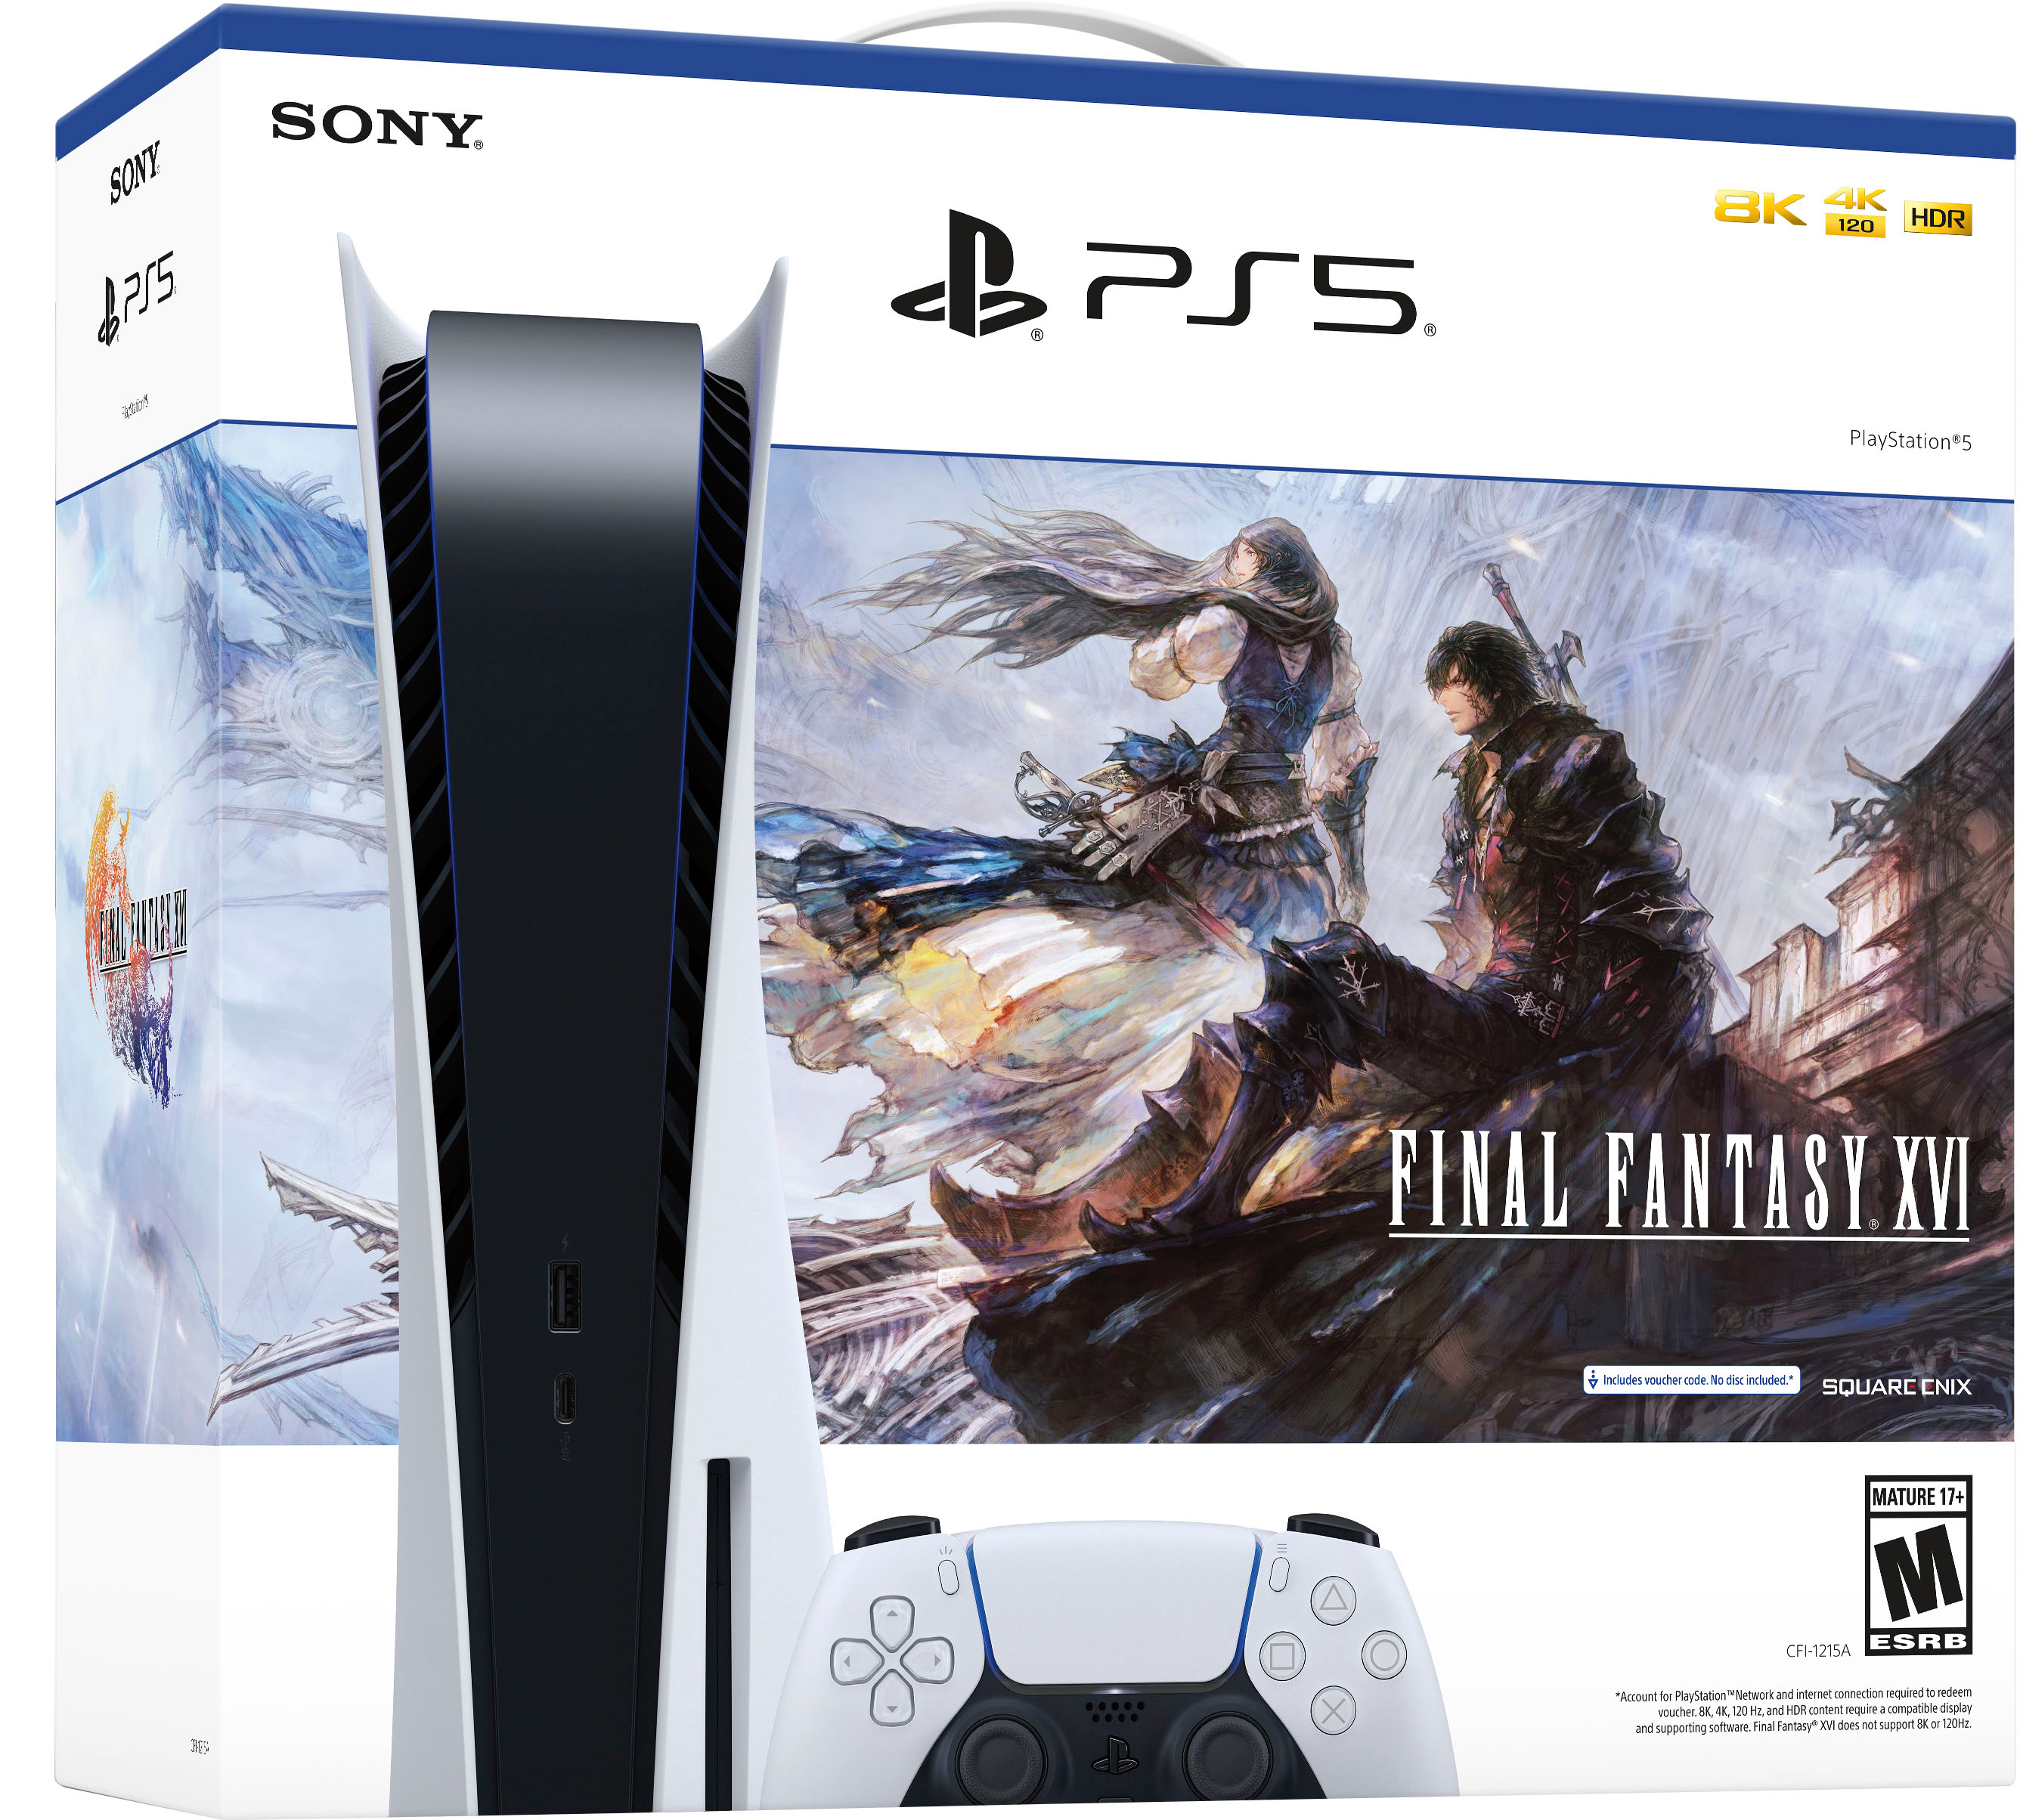 Square Enix Console Games Get Price Cuts At  And Best Buy